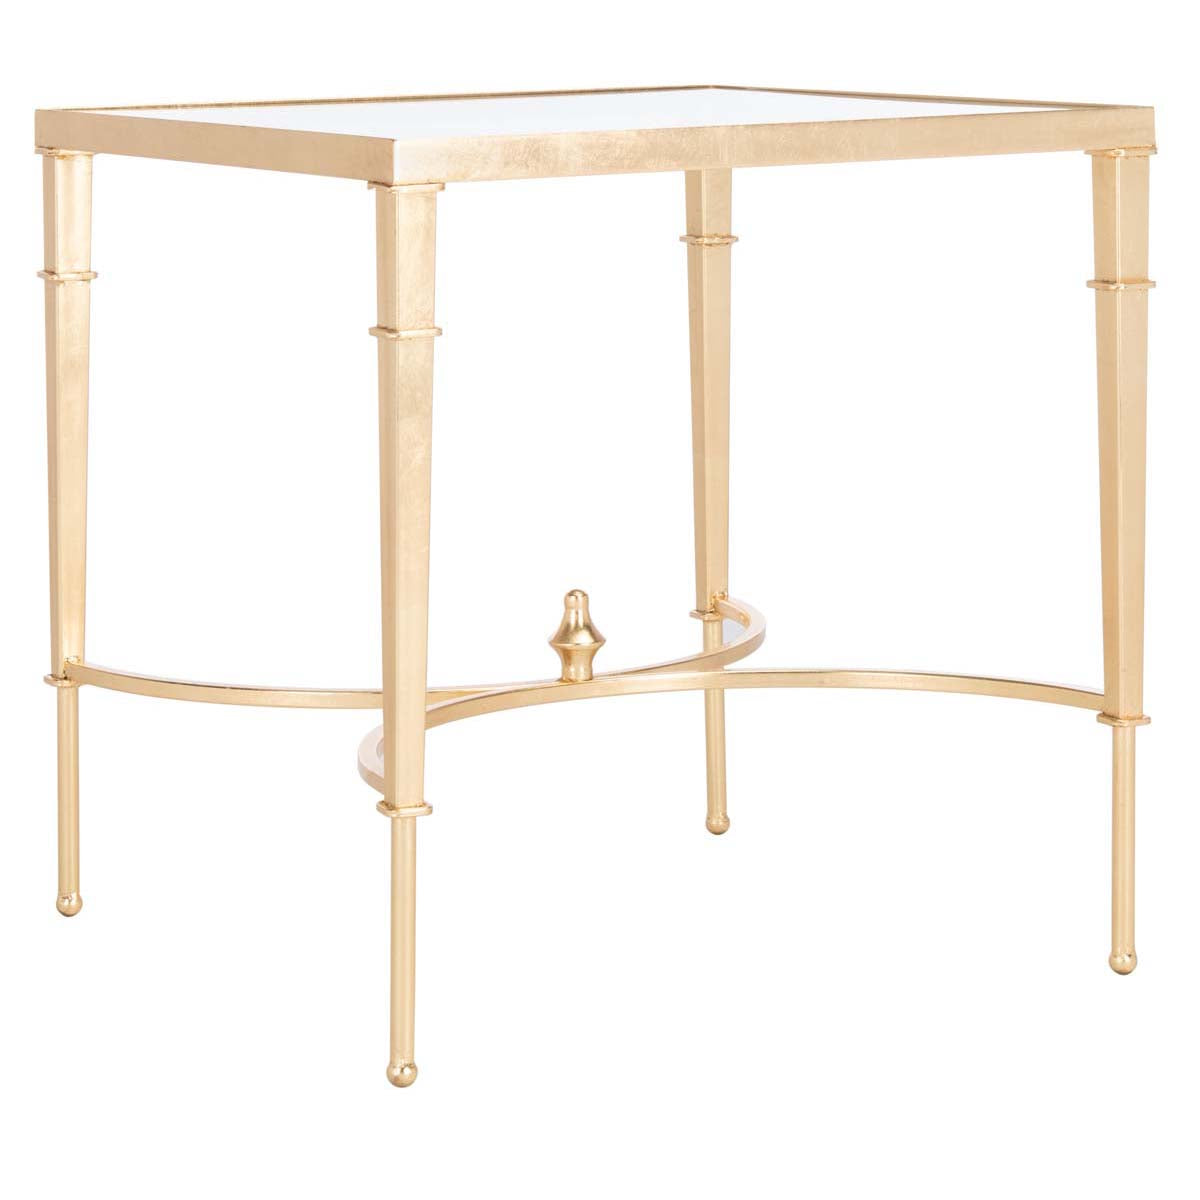 Safavieh Couture Mendez Gold Leaf Accent Table